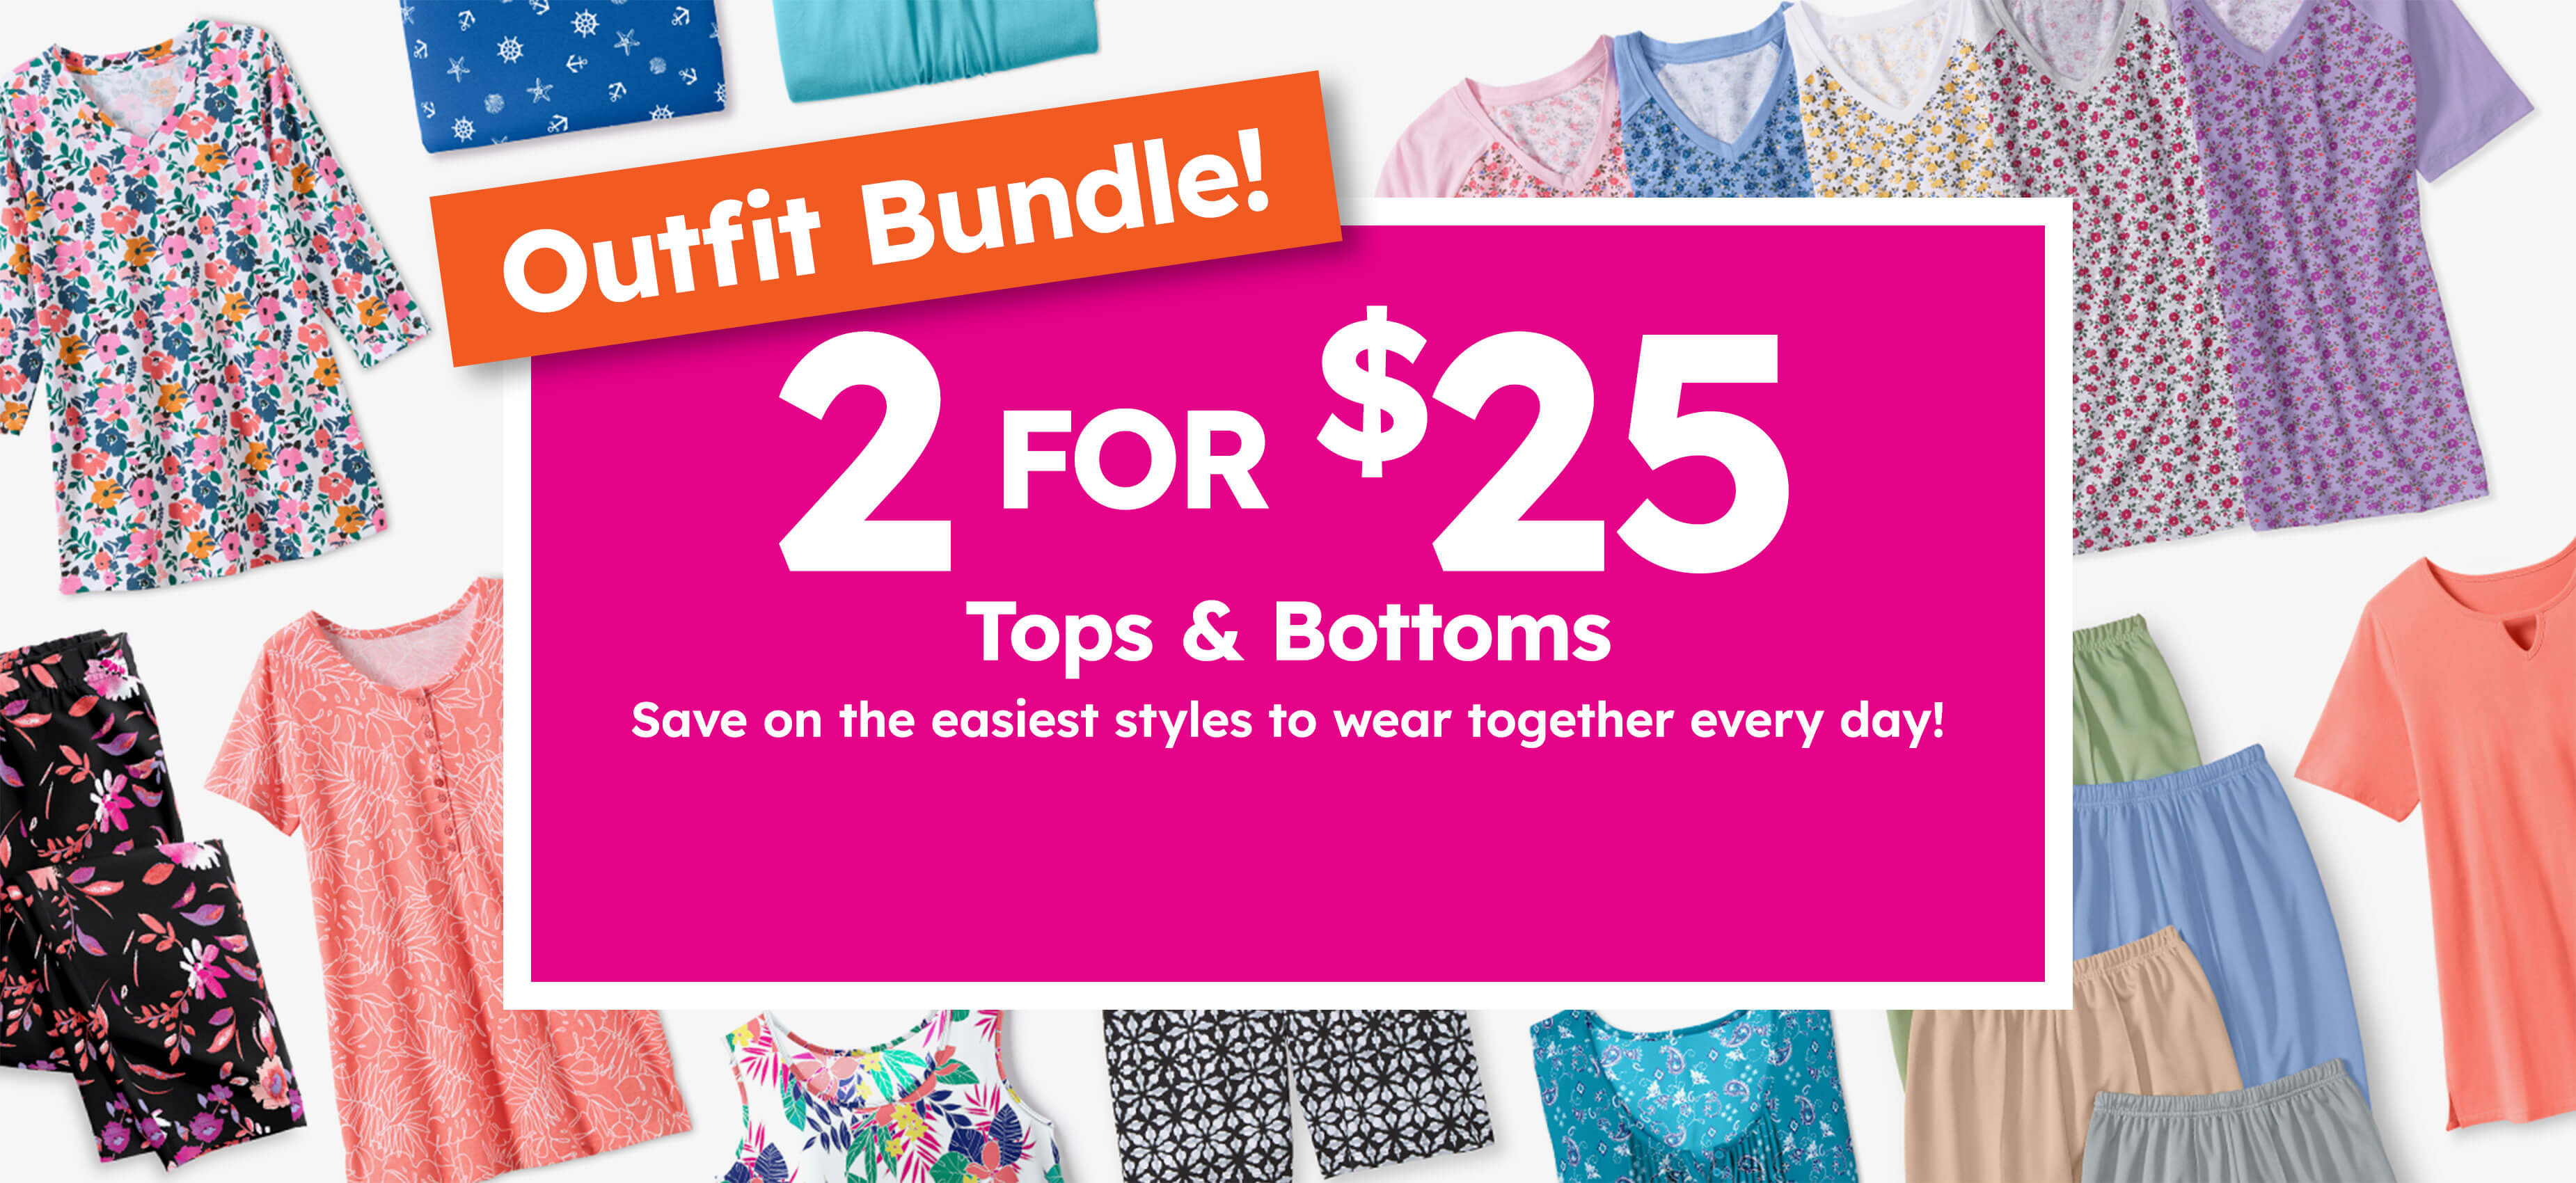 Outfit bundle! 2 for $25 tops & bottoms save on the easiest styles to wear together every day! Click here